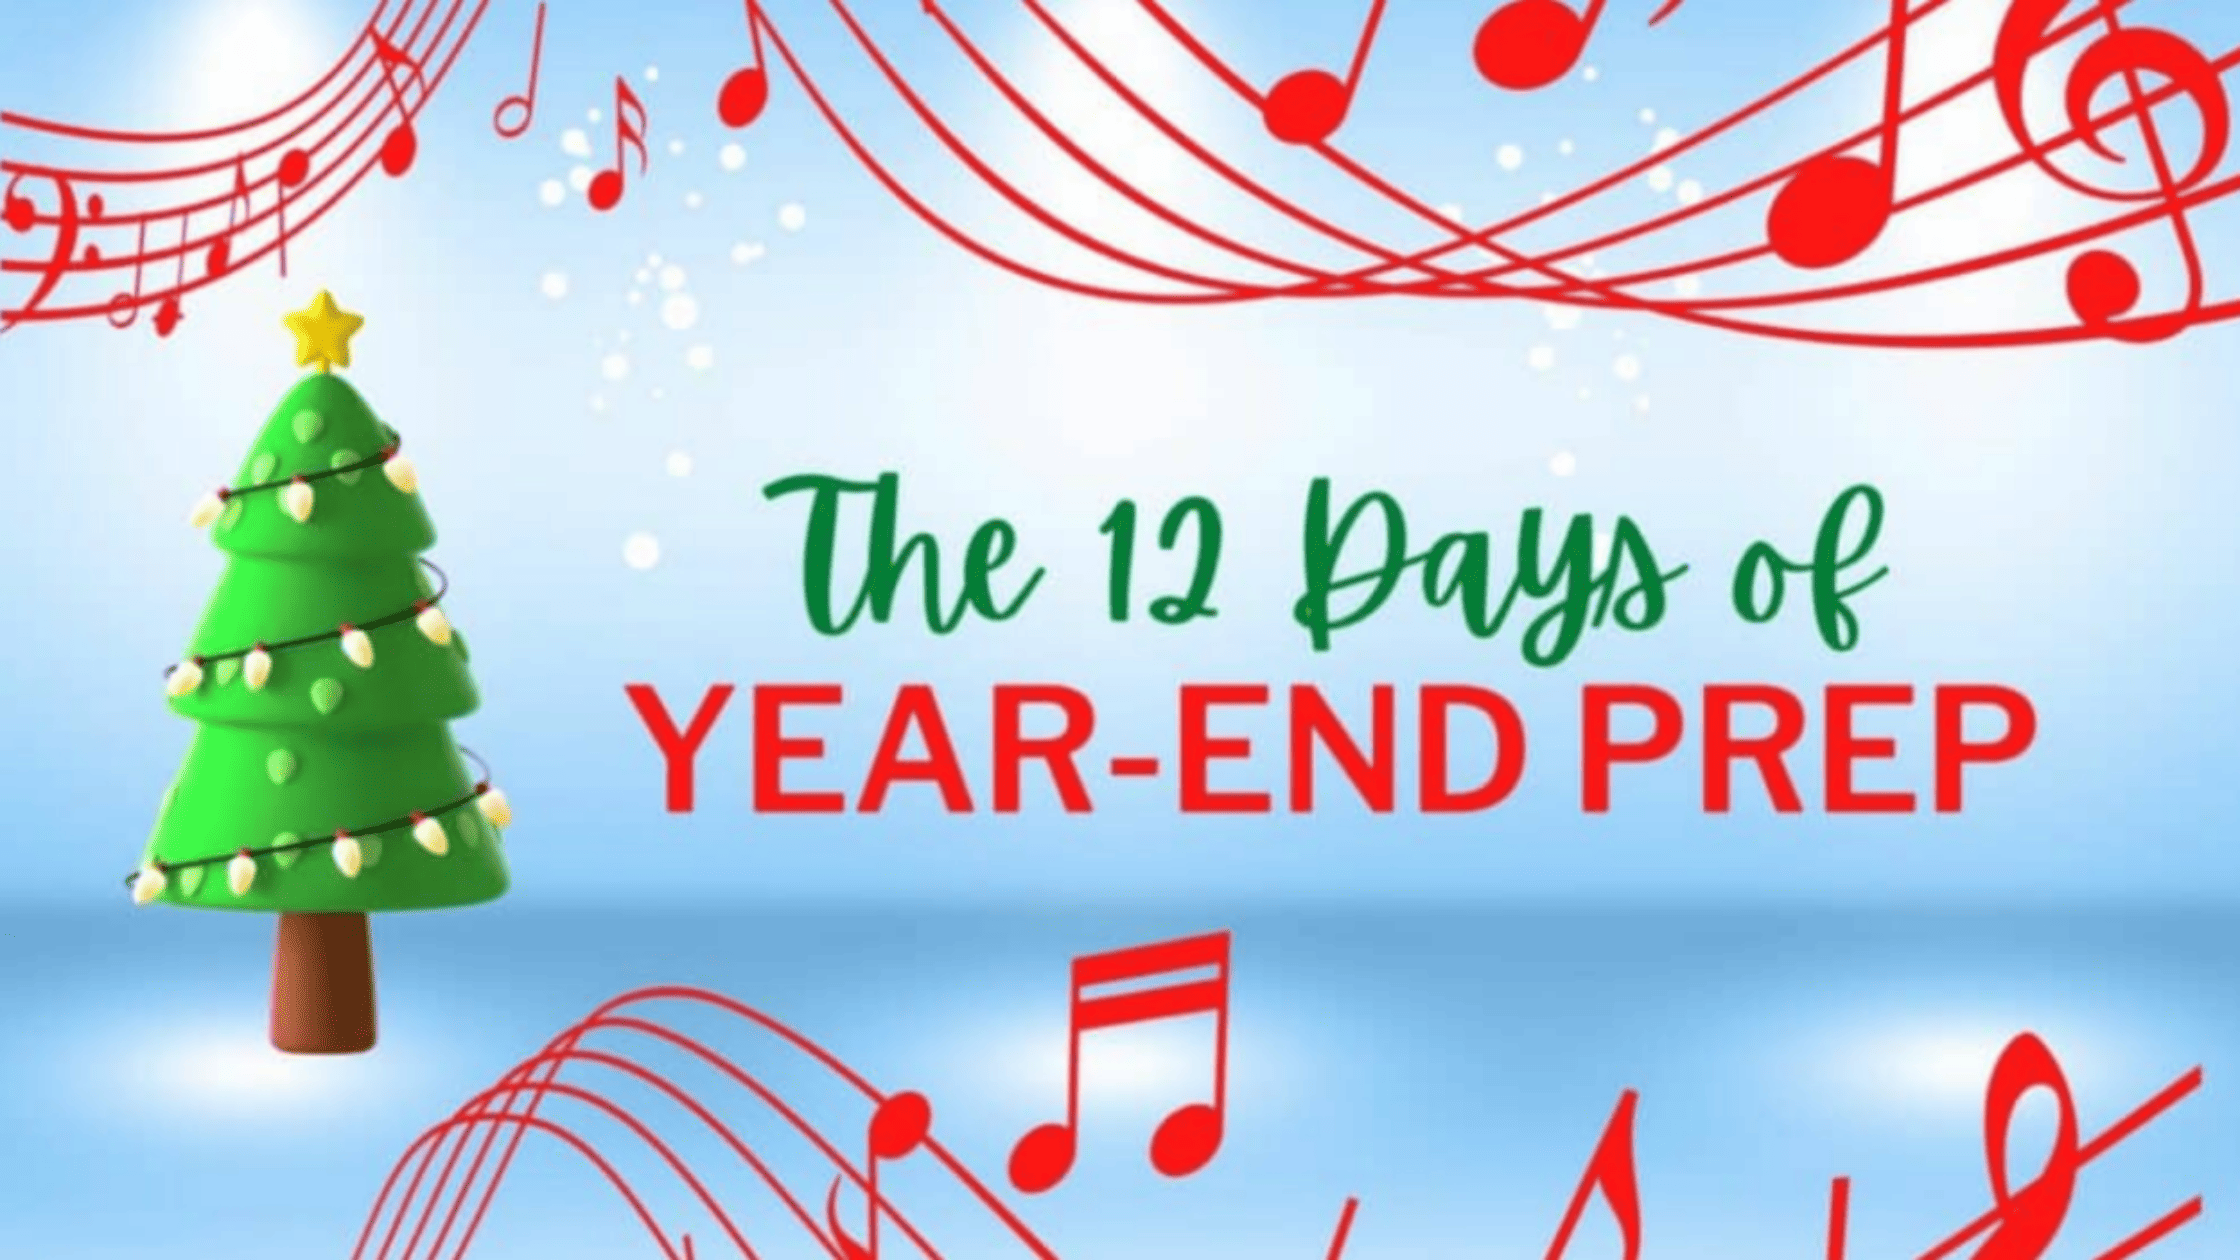 A photo with a Christmas tree and musical note with words “The 12 Days of Year-End Prep”